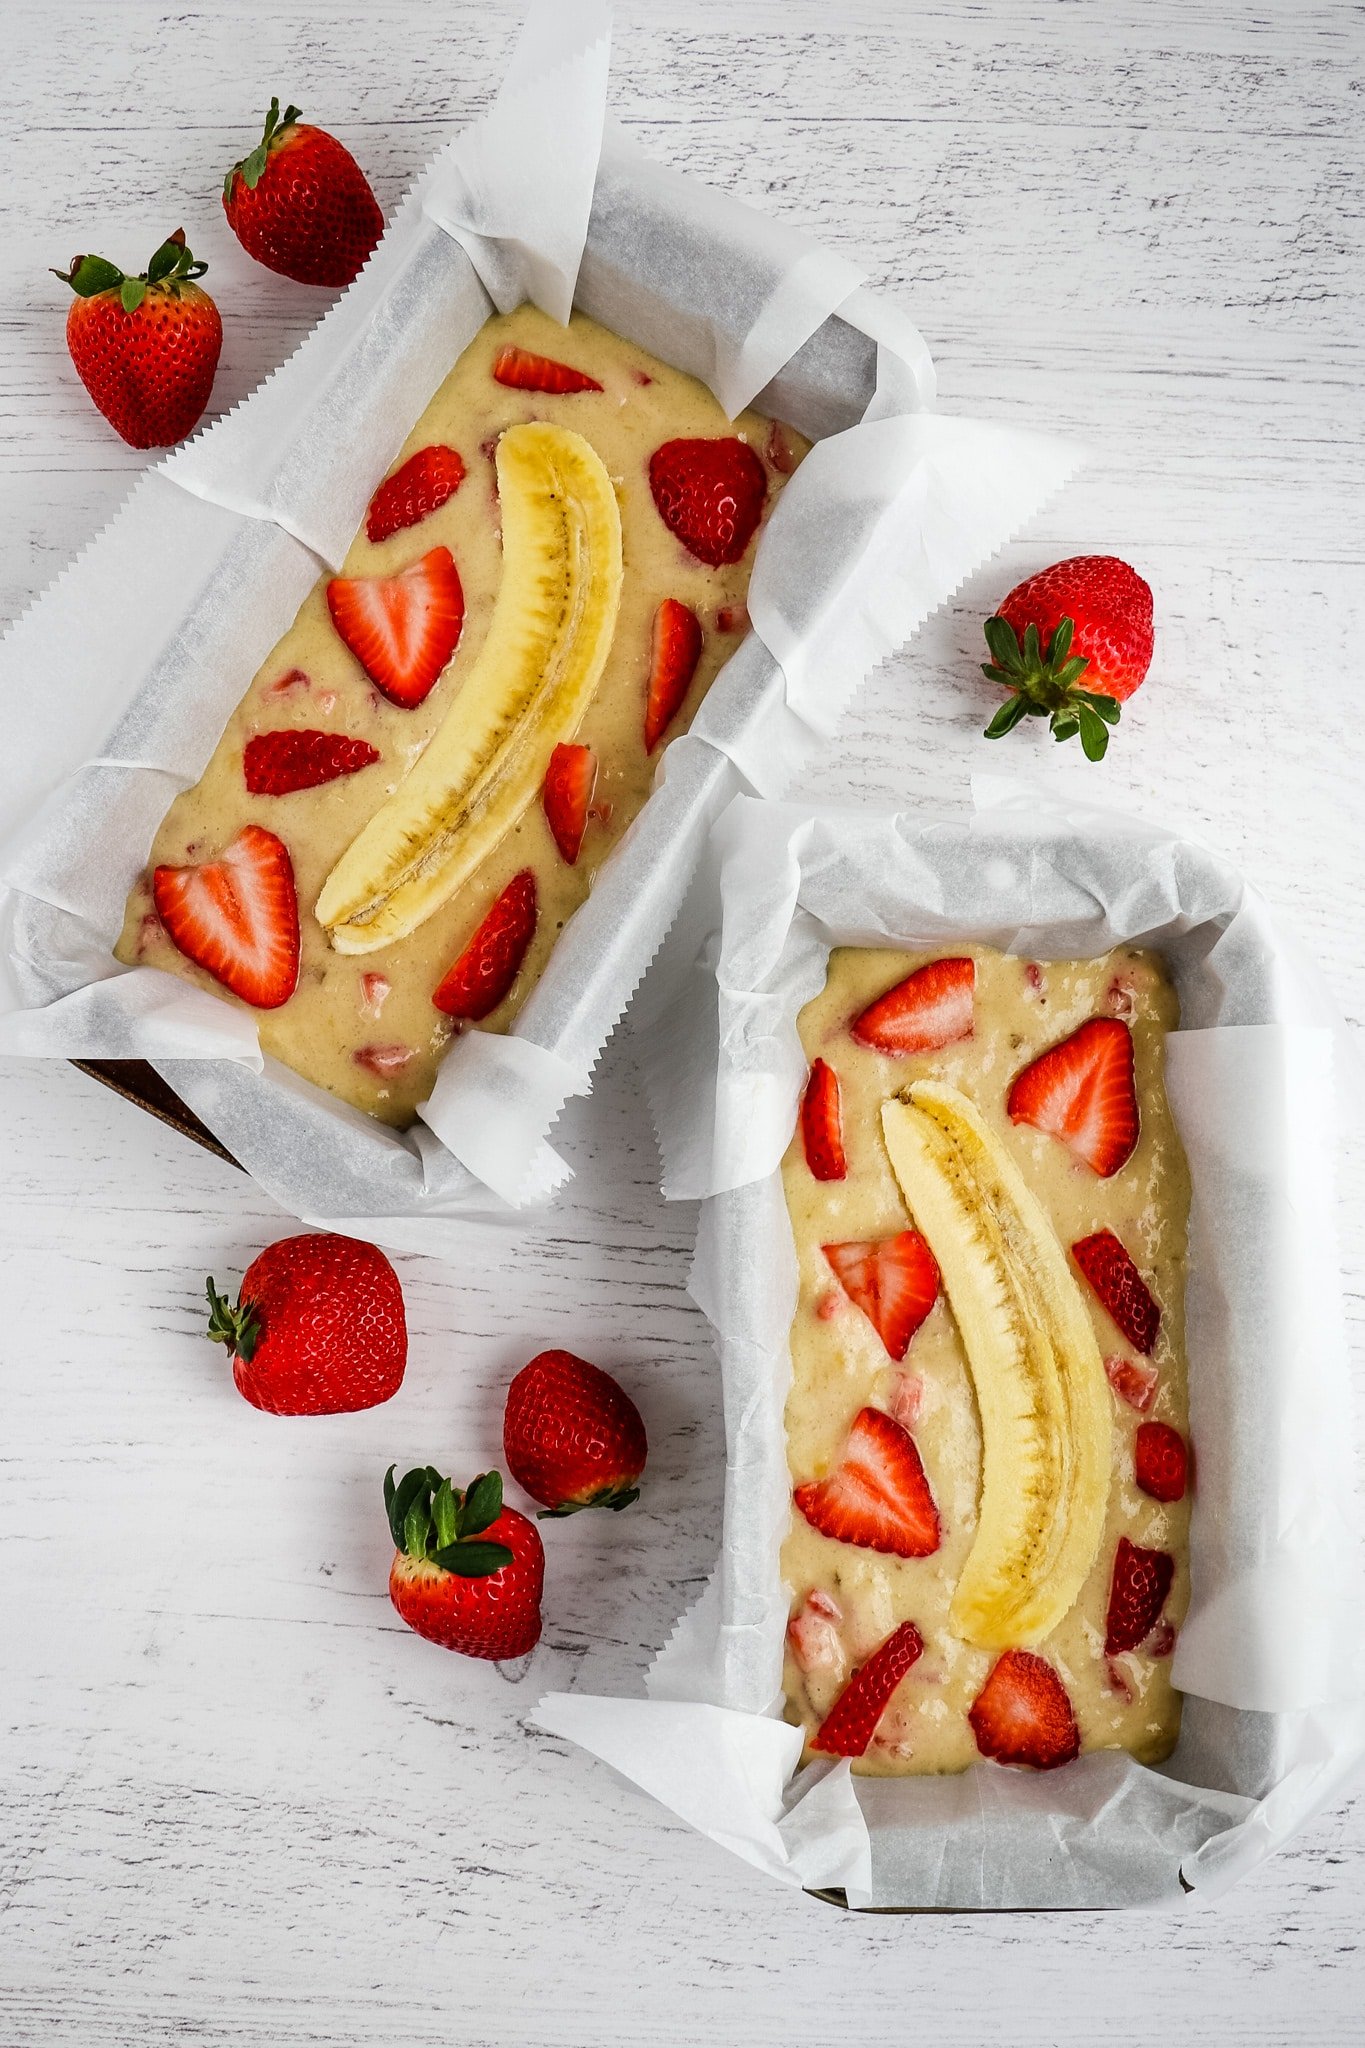 Strawberry banana bread batter poured into loaf pans and topped with sliced strawberries and halved bananas.